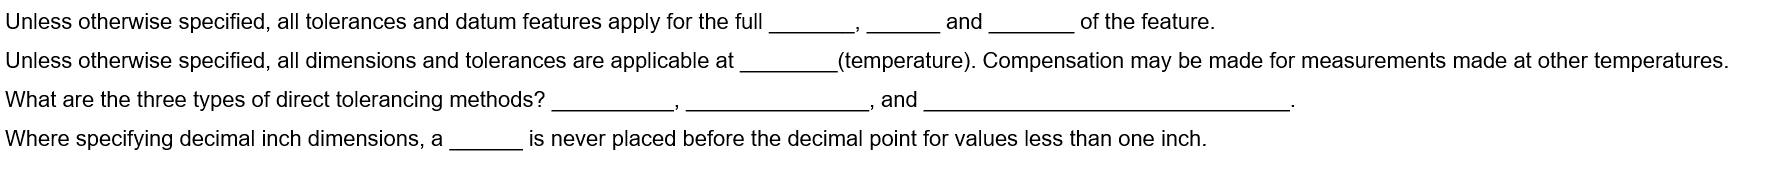 Unless otherwise specified, all tolerances and datum features apply for the full
Unless otherwise specified, all dimensions and tolerances are applicable at
What are the three types of direct tolerancing methods?
Where specifying decimal inch dimensions, a
and
of the feature.
(temperature). Compensation may be made for measurements made at other temperatures.
and
is never placed before the decimal point for values less than one inch.